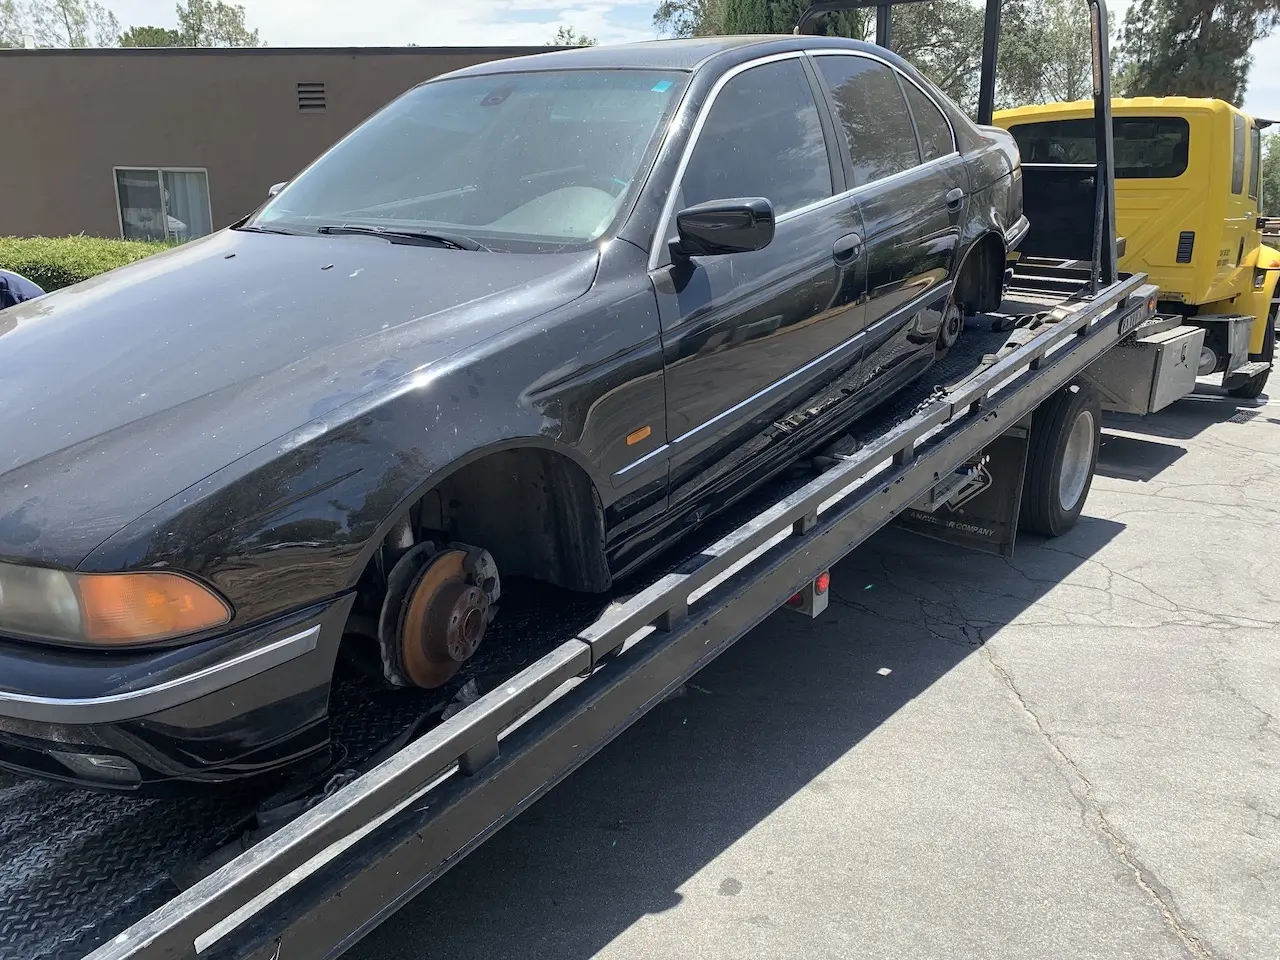 Flatbeds are perfect for abandoned vehicles or junk car removal.